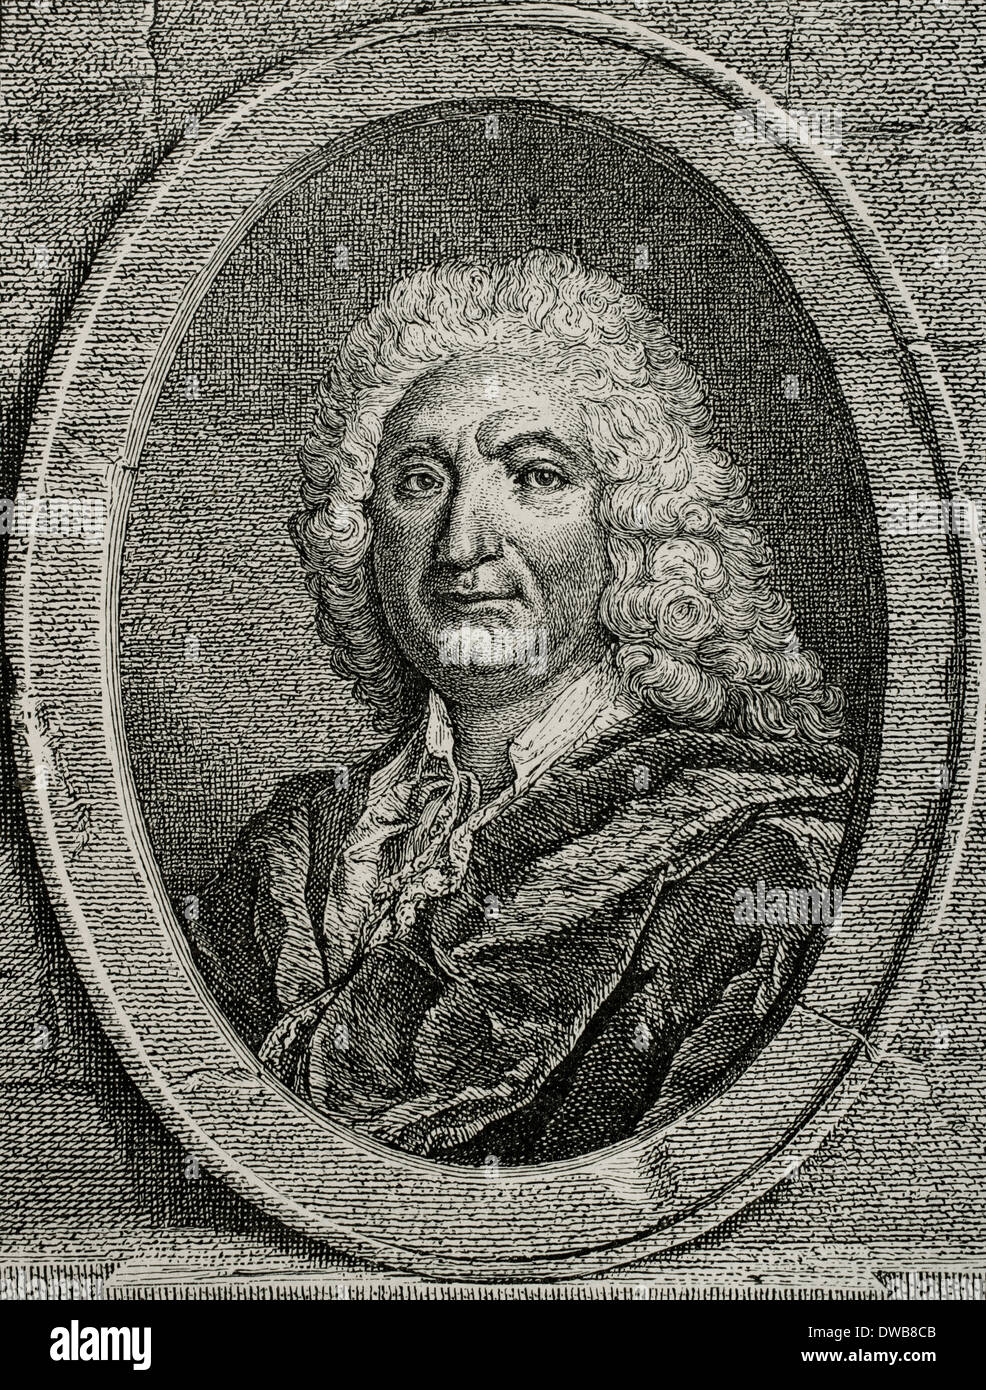 Alain-Rene Lesage (1668- 1747). French novelist and playwright. Best known for picaresque novel Gil Blas. Engraving. Stock Photo